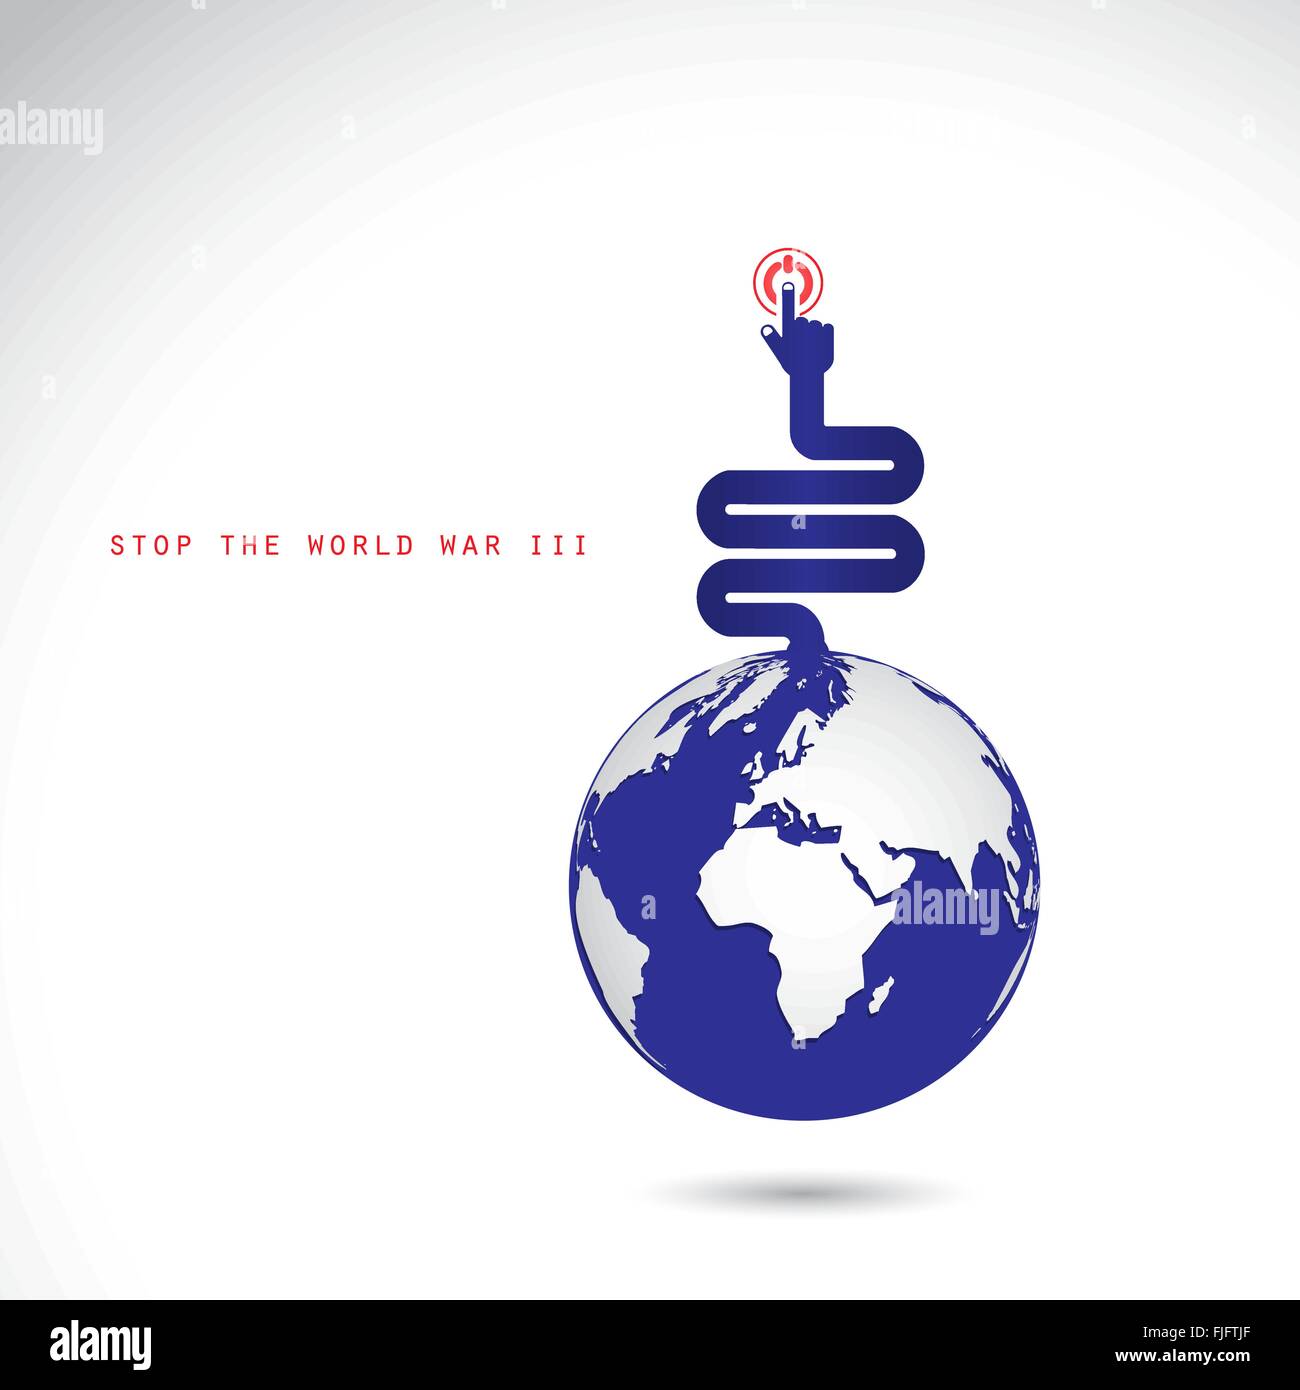 World symbol with hands press the button, stop the world war III concept. Business and financial ideas. Vector illustration Stock Vector